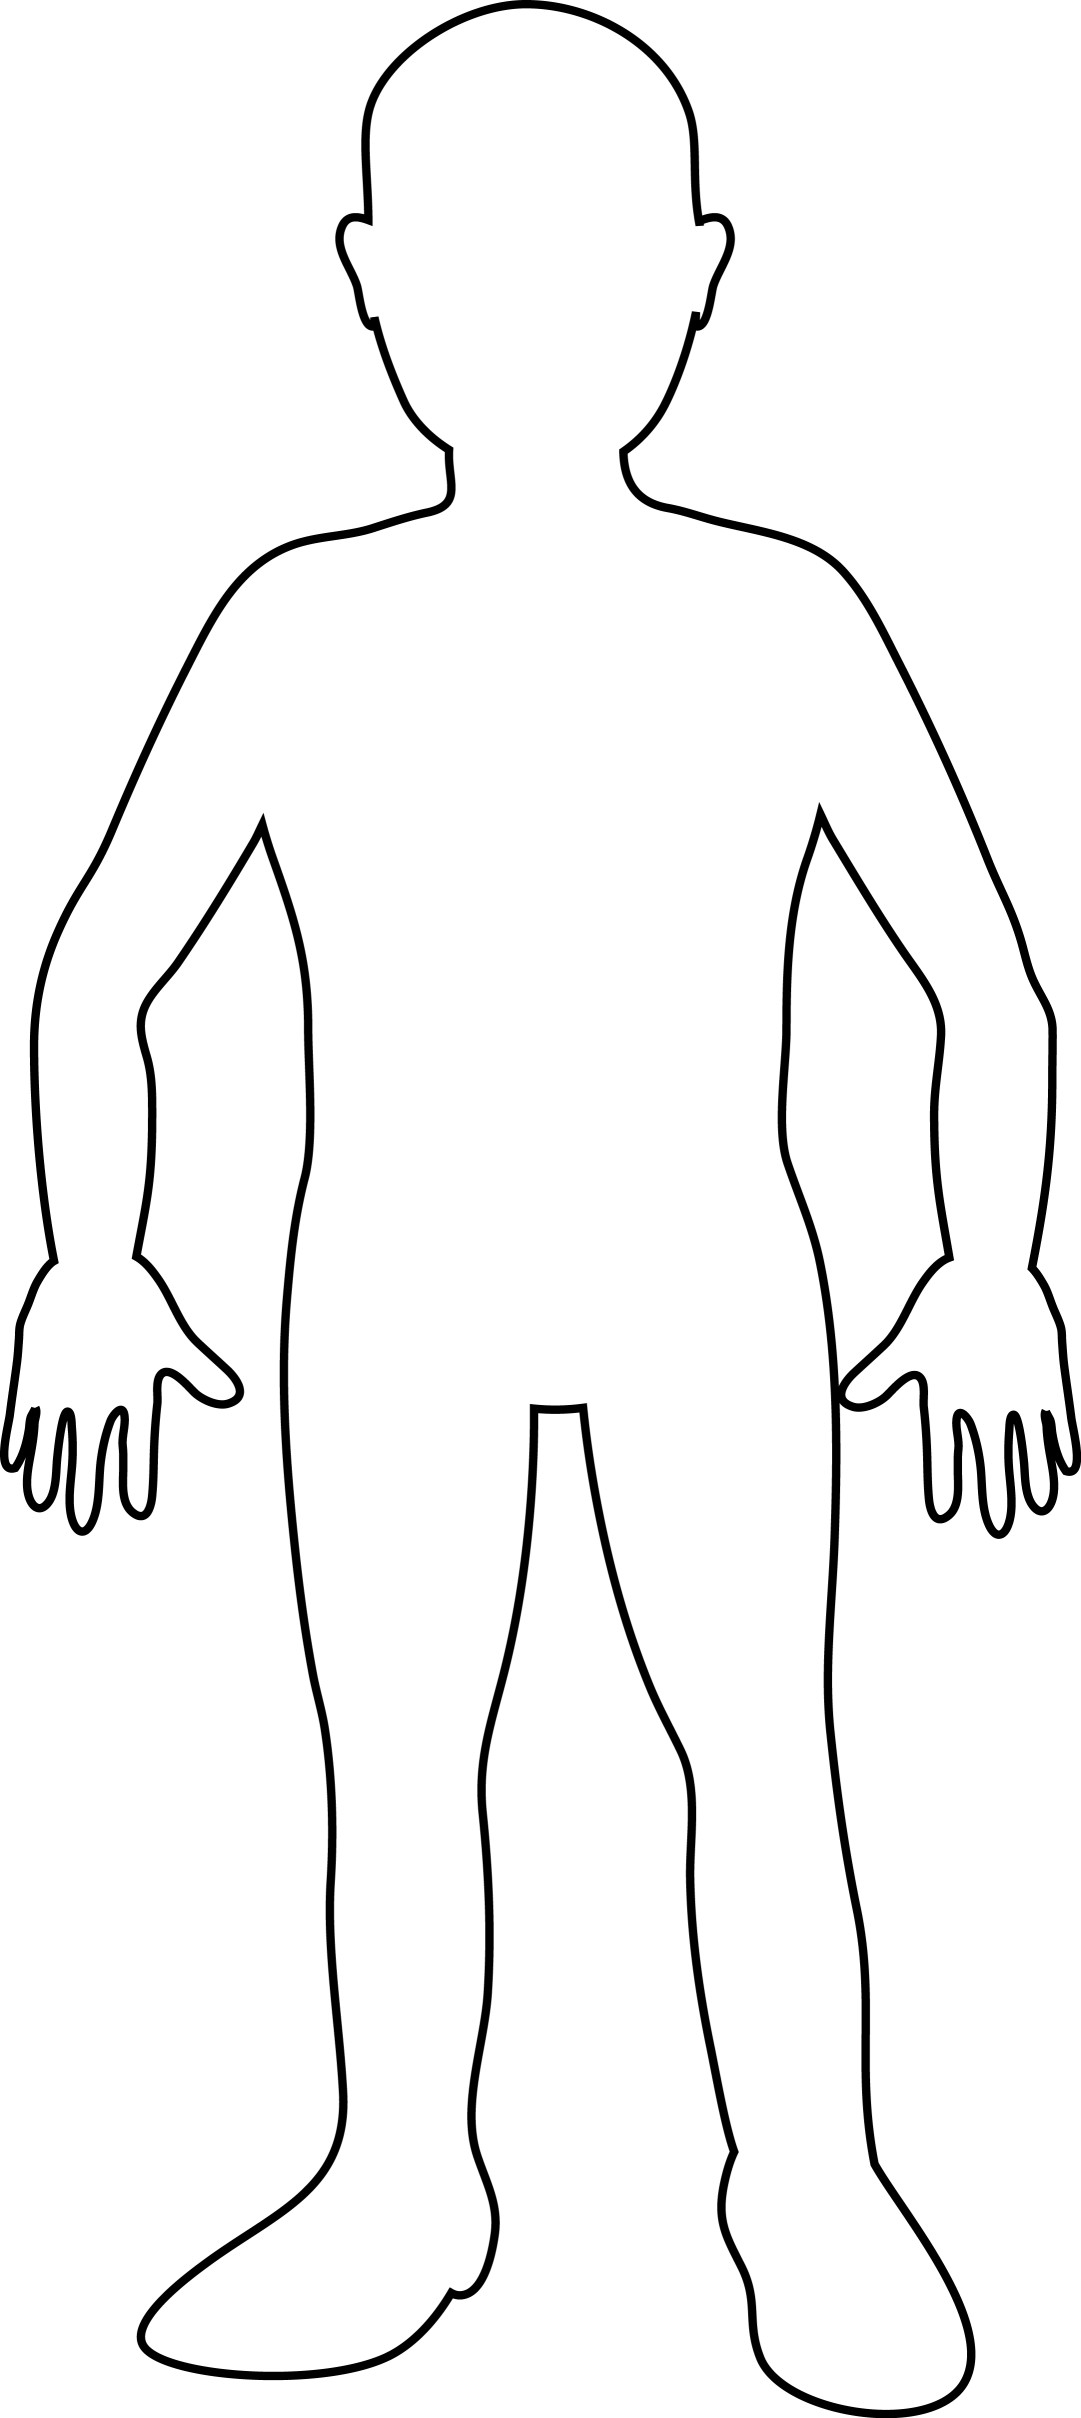 clipart human body outline - photo #39